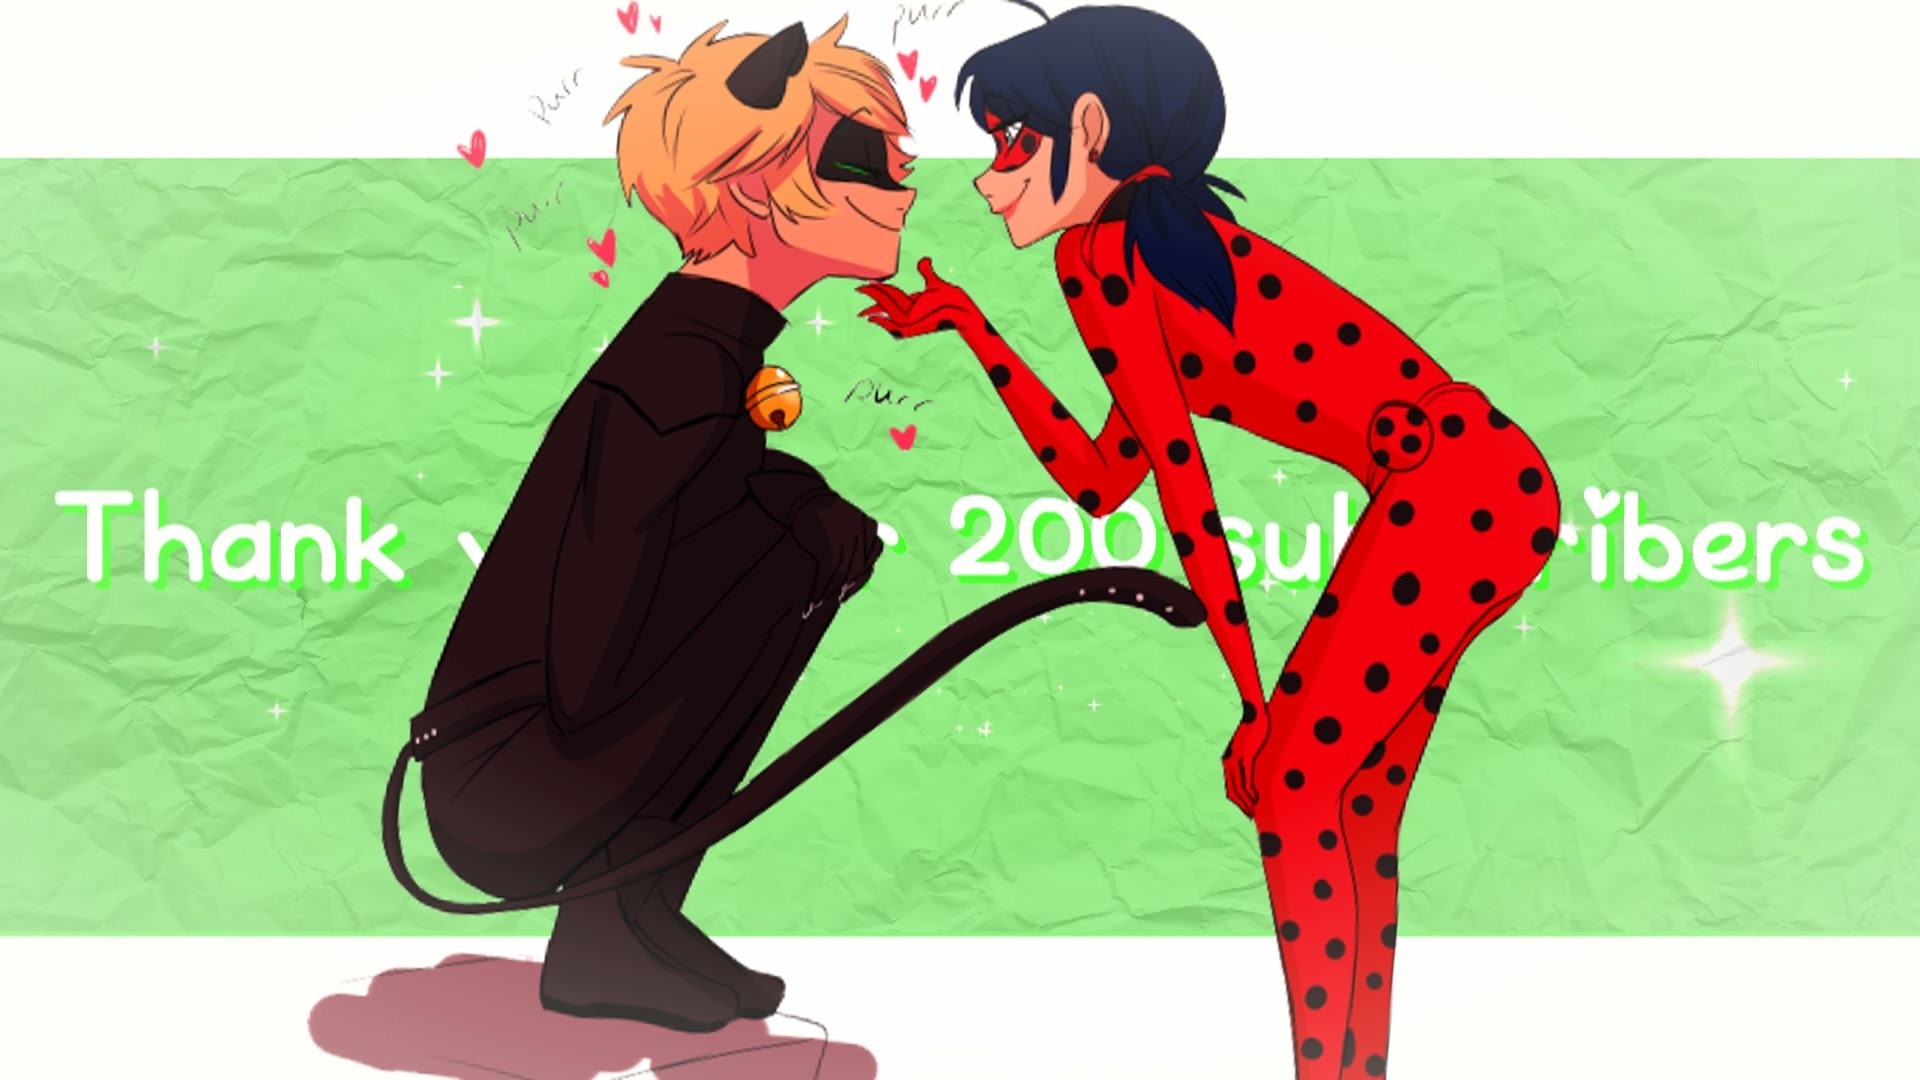 Miraculous Chat noir x Ladybug /// Thank you for 200 subscribers â¥ – YouTube